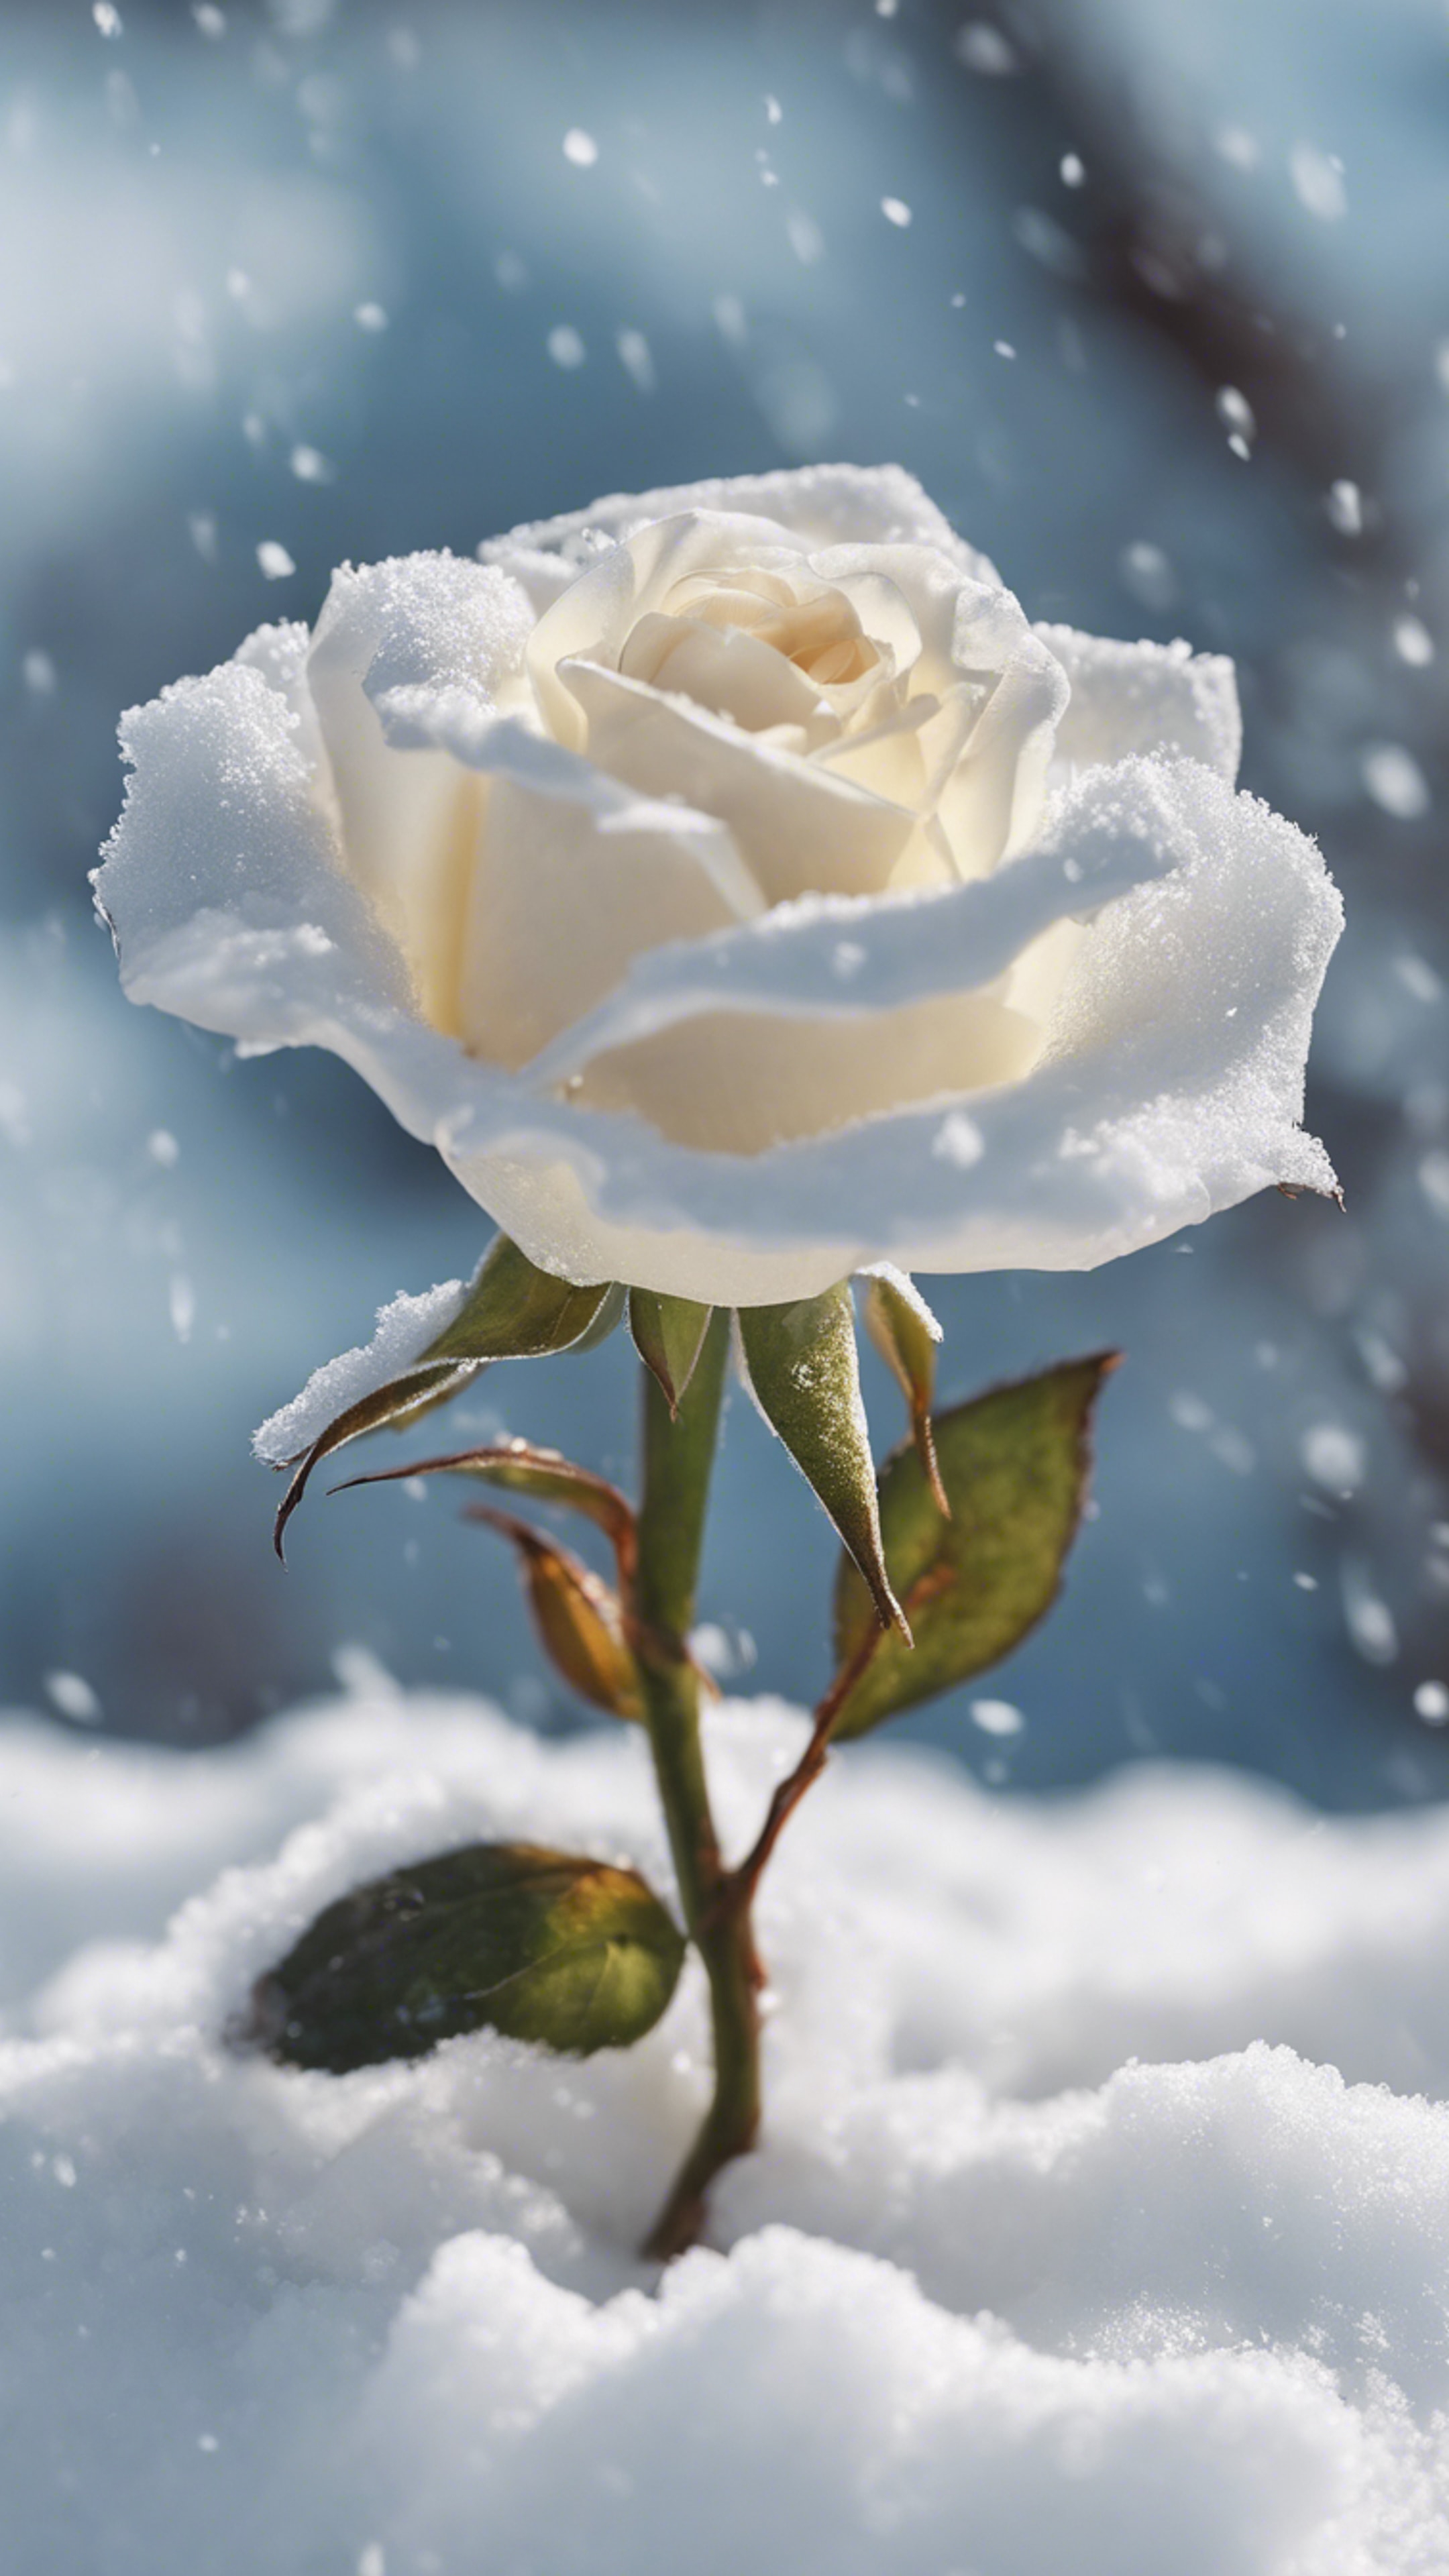 A newly opened white rose sticking out of a snowdrift in early spring. Behang[6918b7c4f5774047824c]